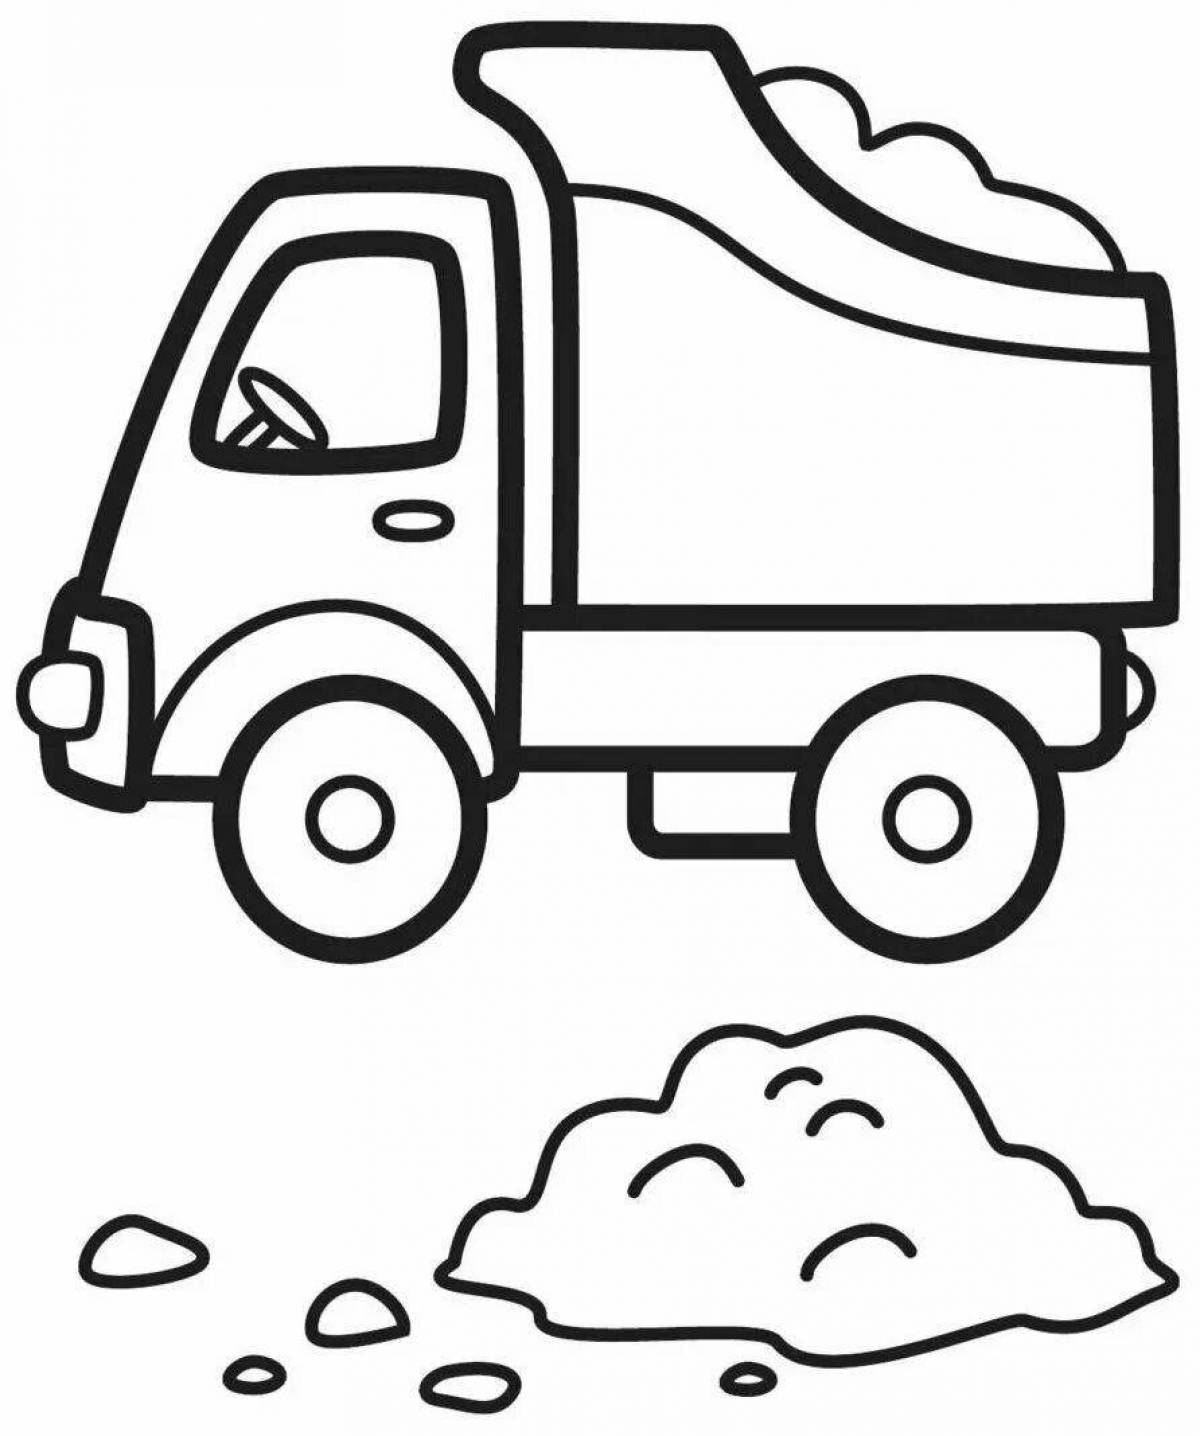 A fun truck coloring book for 3-4 year olds